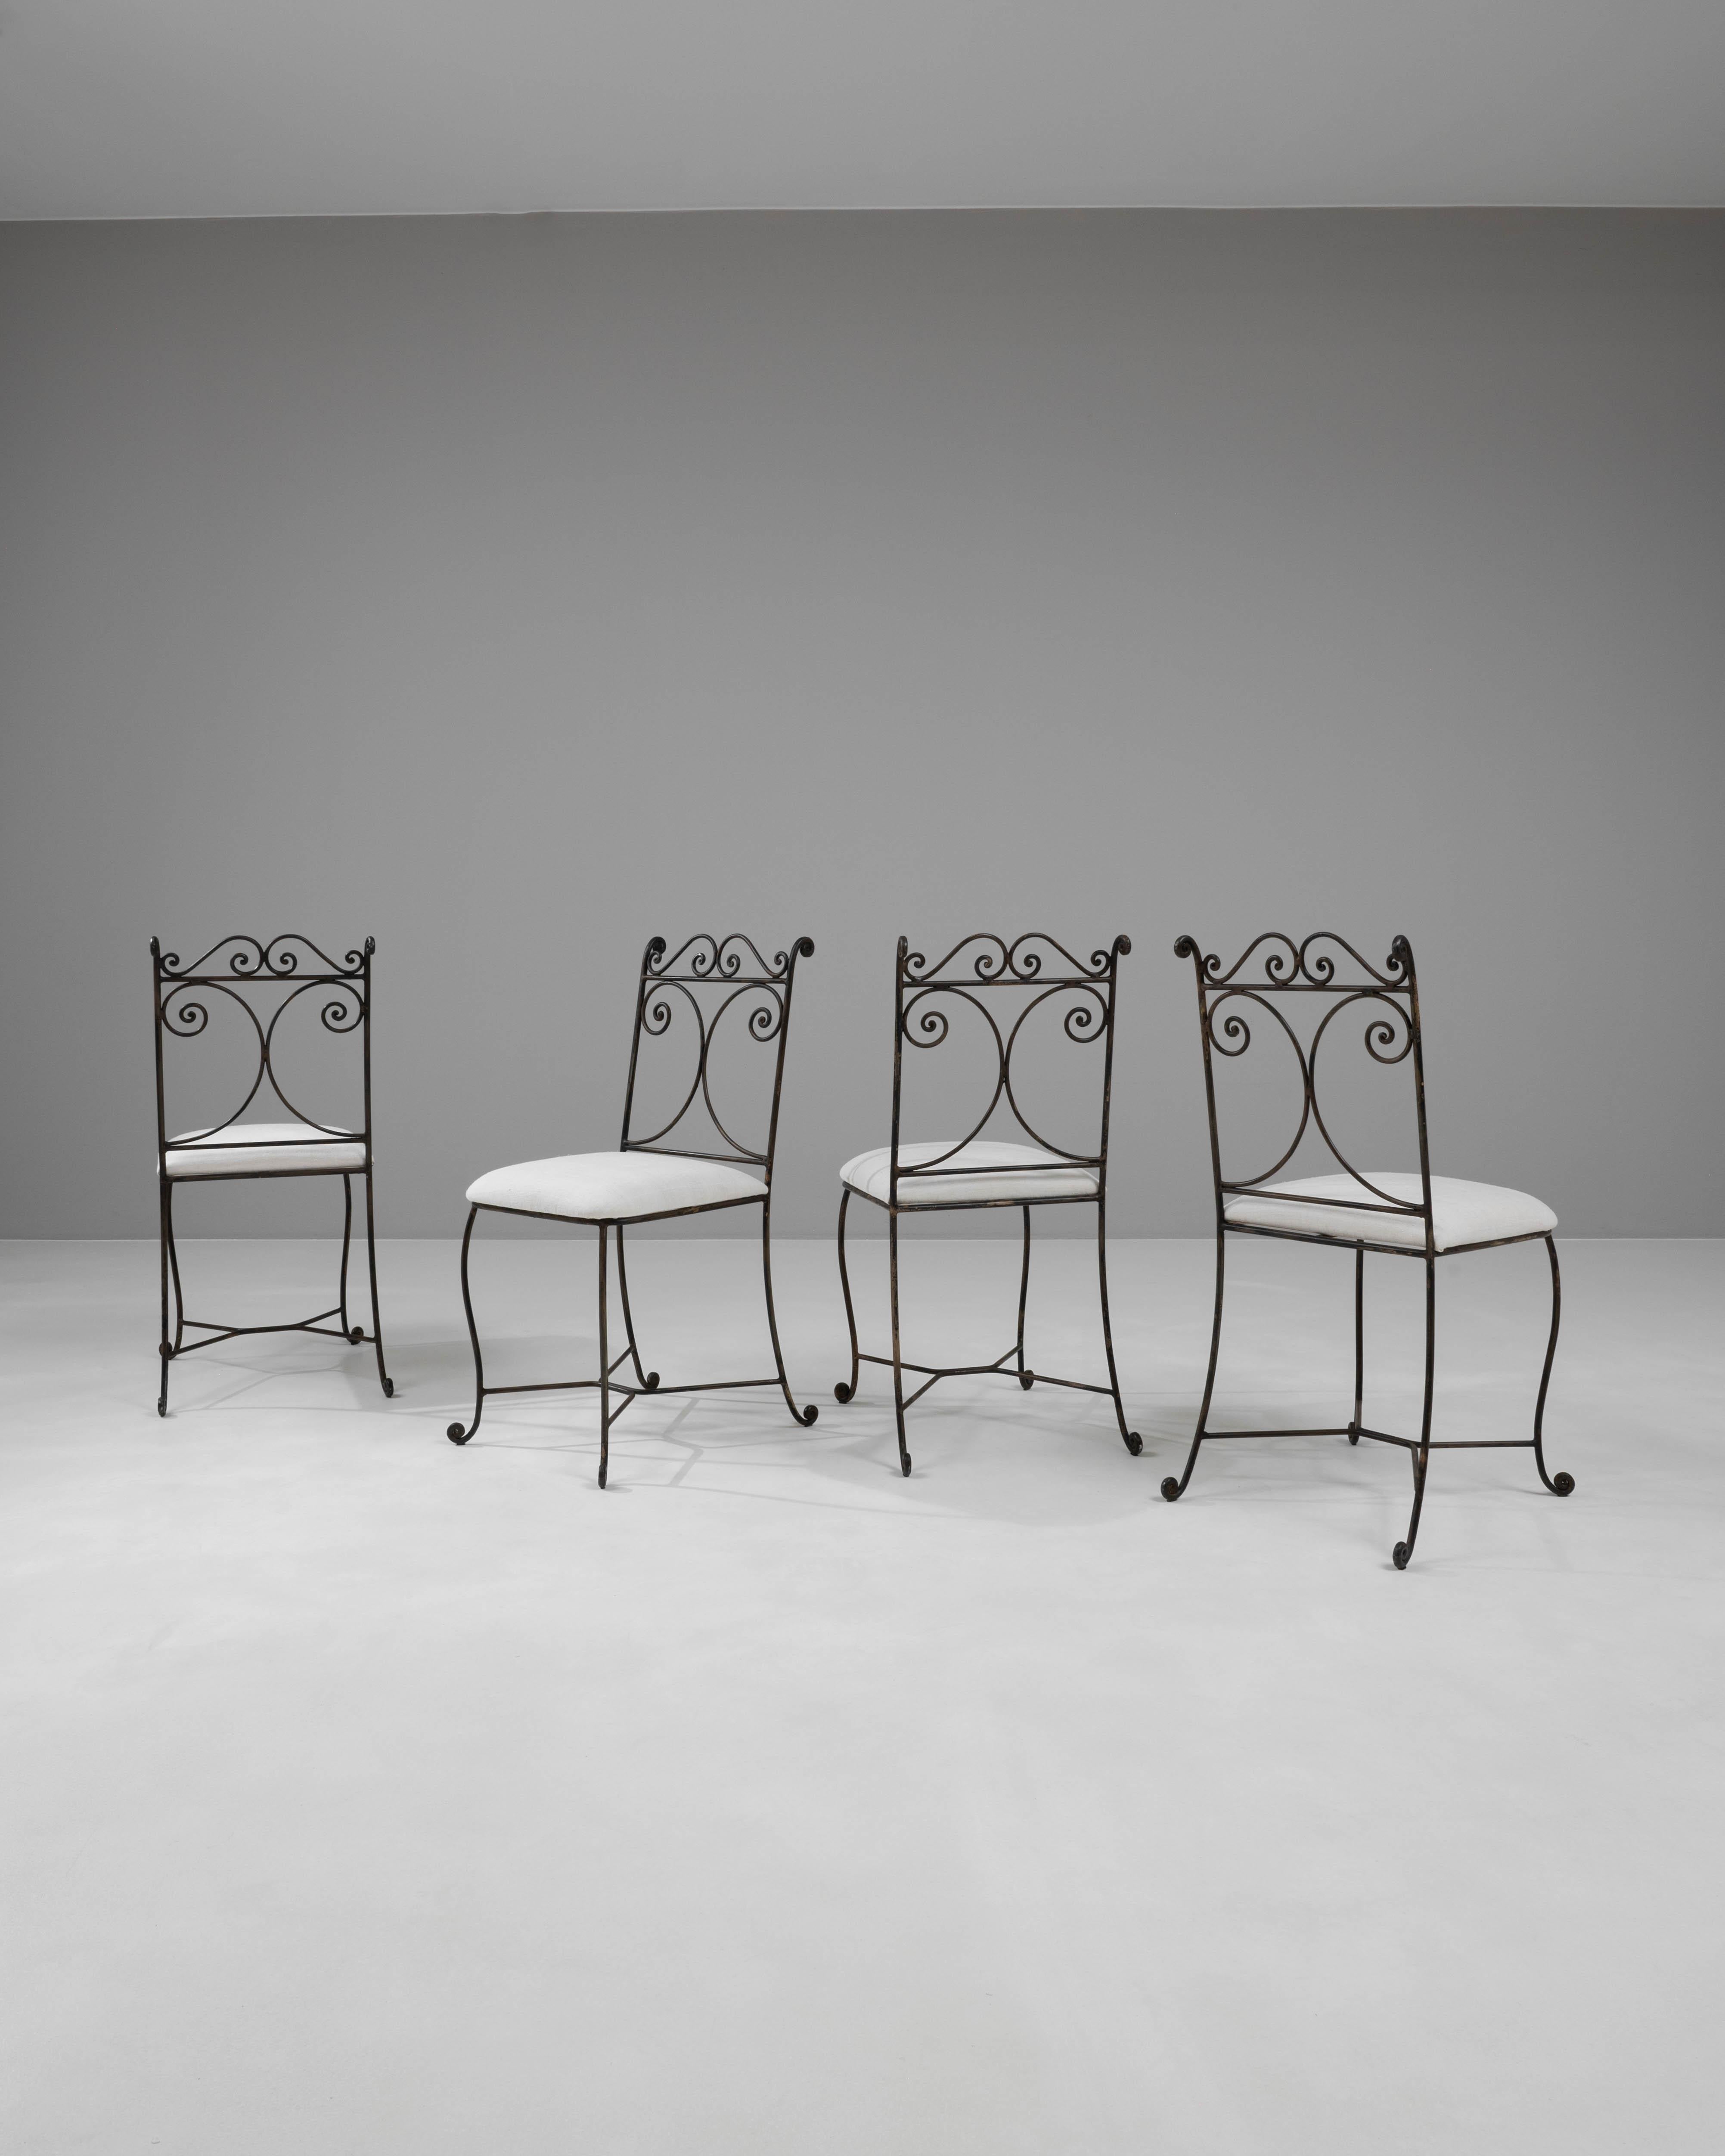 This elegant set of four 20th Century French Metal Chairs offers a beautiful blend of classical design and industrial flair, perfect for adding a unique touch to any dining room or patio setting. Crafted with delicate ironwork, the chairs feature